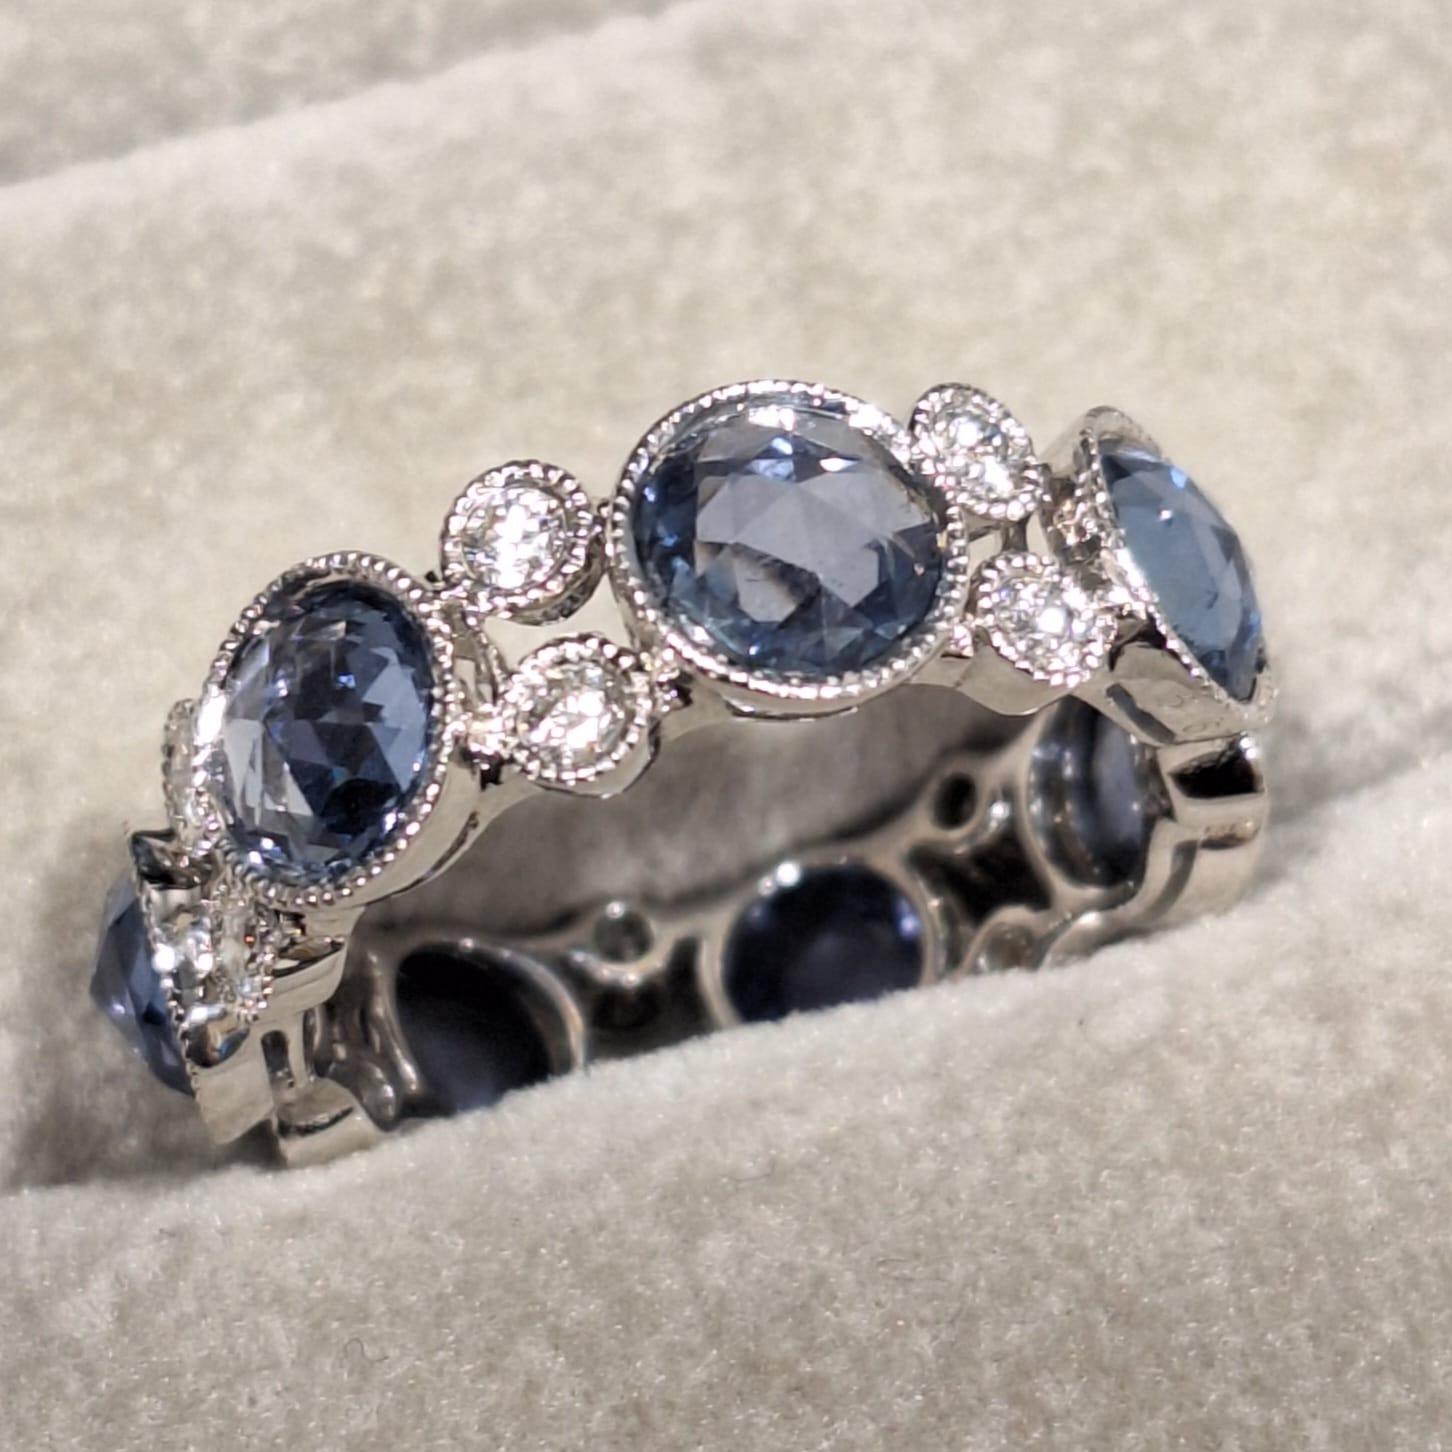 18K White Gold Diamond Ring with Sapphire

Sapphire is believed to promote wisdom, accurate thinking and spiritual truth. It is believed to be connected with the throat and the conscience, allowing the wearer to access a deeper understanding of